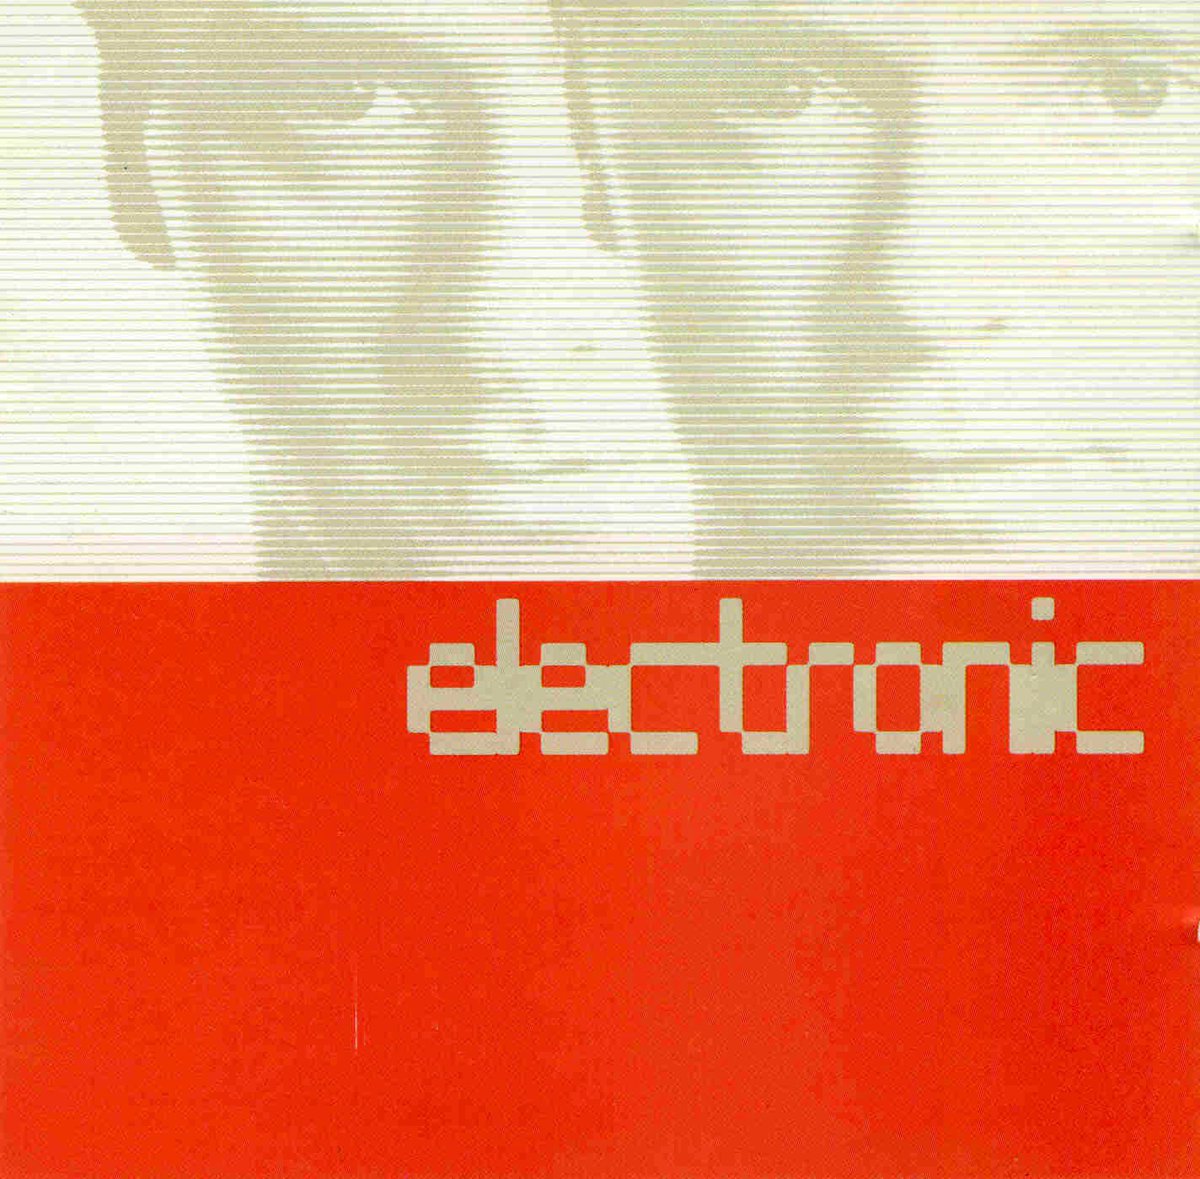 On this day in 1991, Electronic - the supergroup consisting of New Order’s Bernard Sumner, @Johnny_Marr and sometimes Neil Tennant of Pet Shop Boys released their debut album featuring 'Tighten Up' “Getting Away with It' “Get the Message' and “Feel Every Beat'